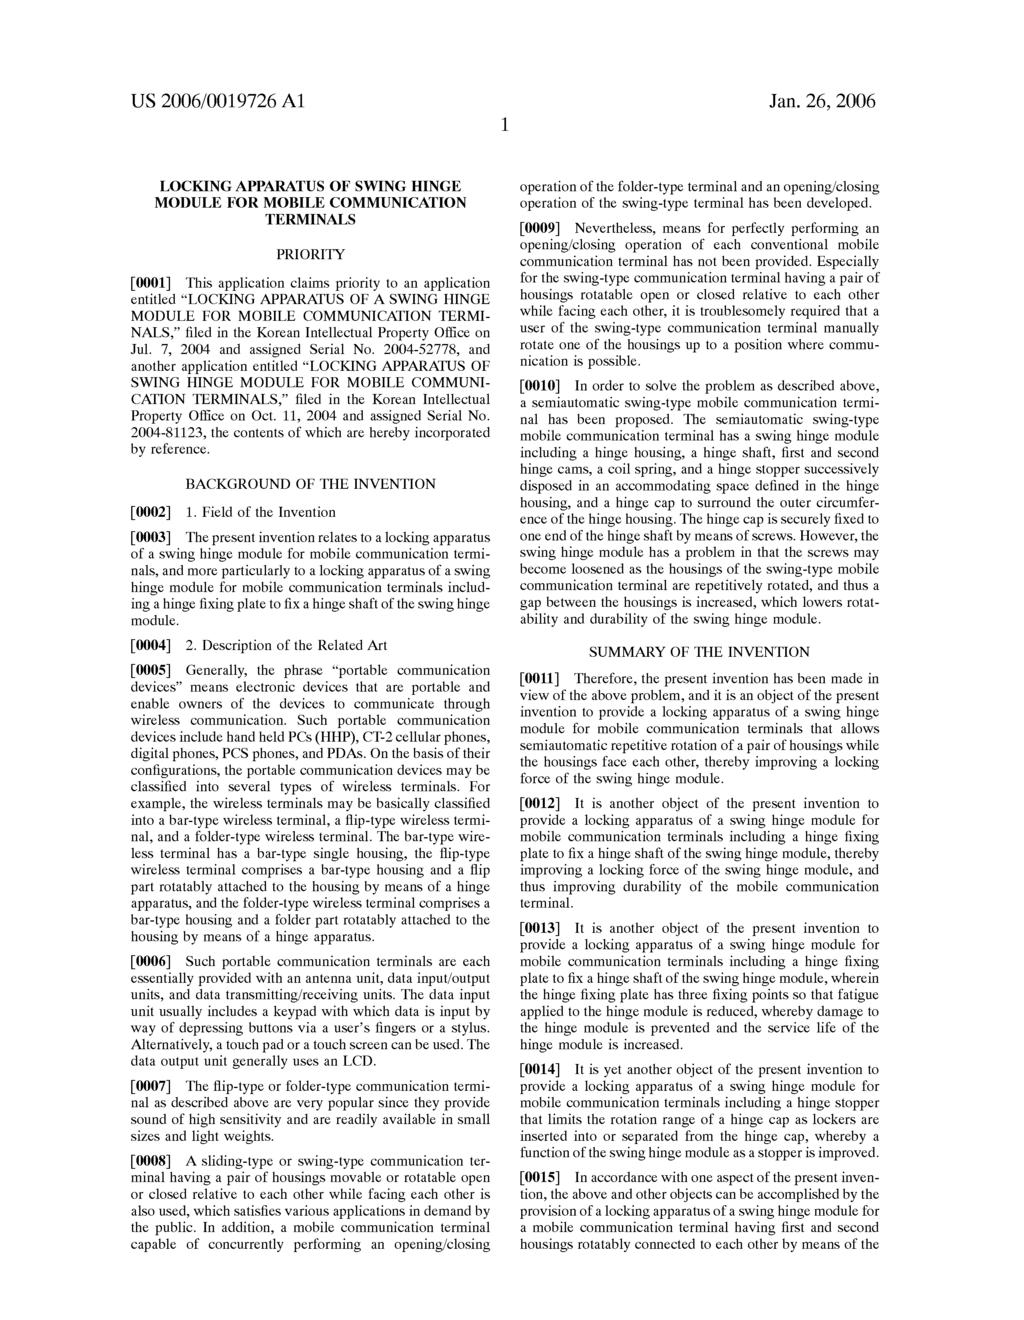 US 2006/OO19726 A1 Jan. 26, 2006 LOCKINGAPPARATUS OF SWING HINGE MODULE FOR MOBILE COMMUNICATION TERMINALS PRIORITY 0001.